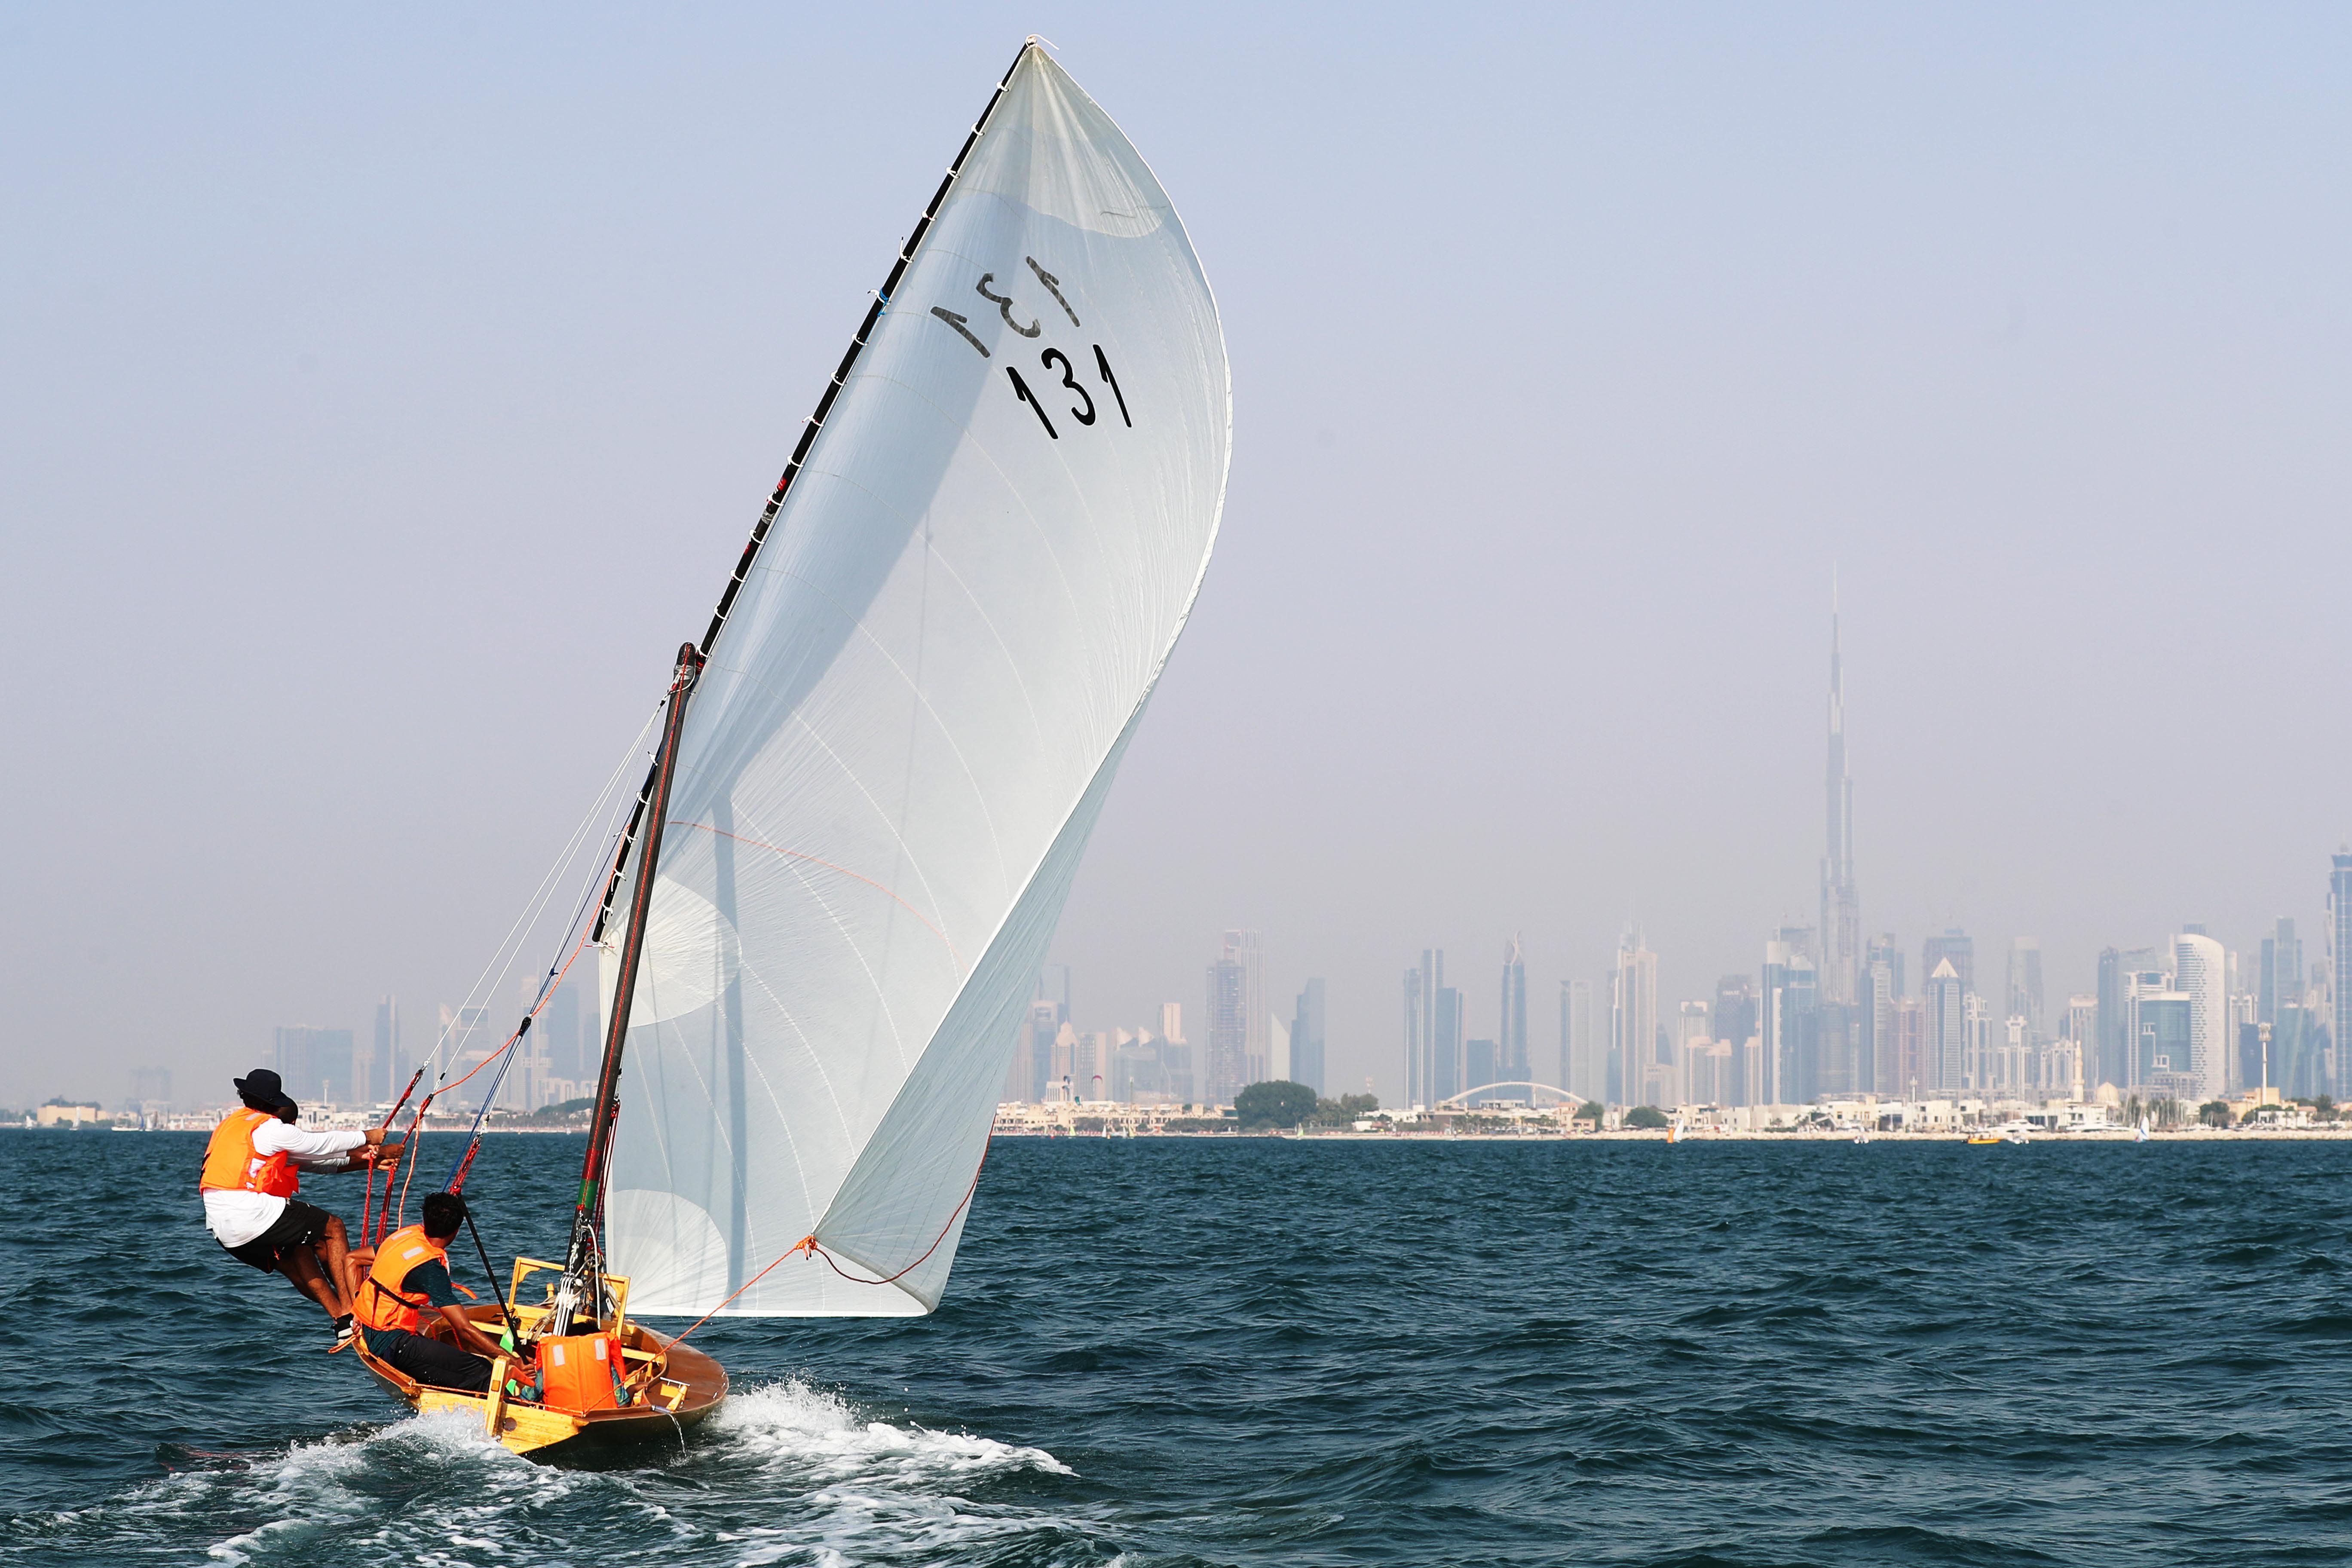 Mafarj 131 Champion of the 22ft Dhow Sailing Overall Standing